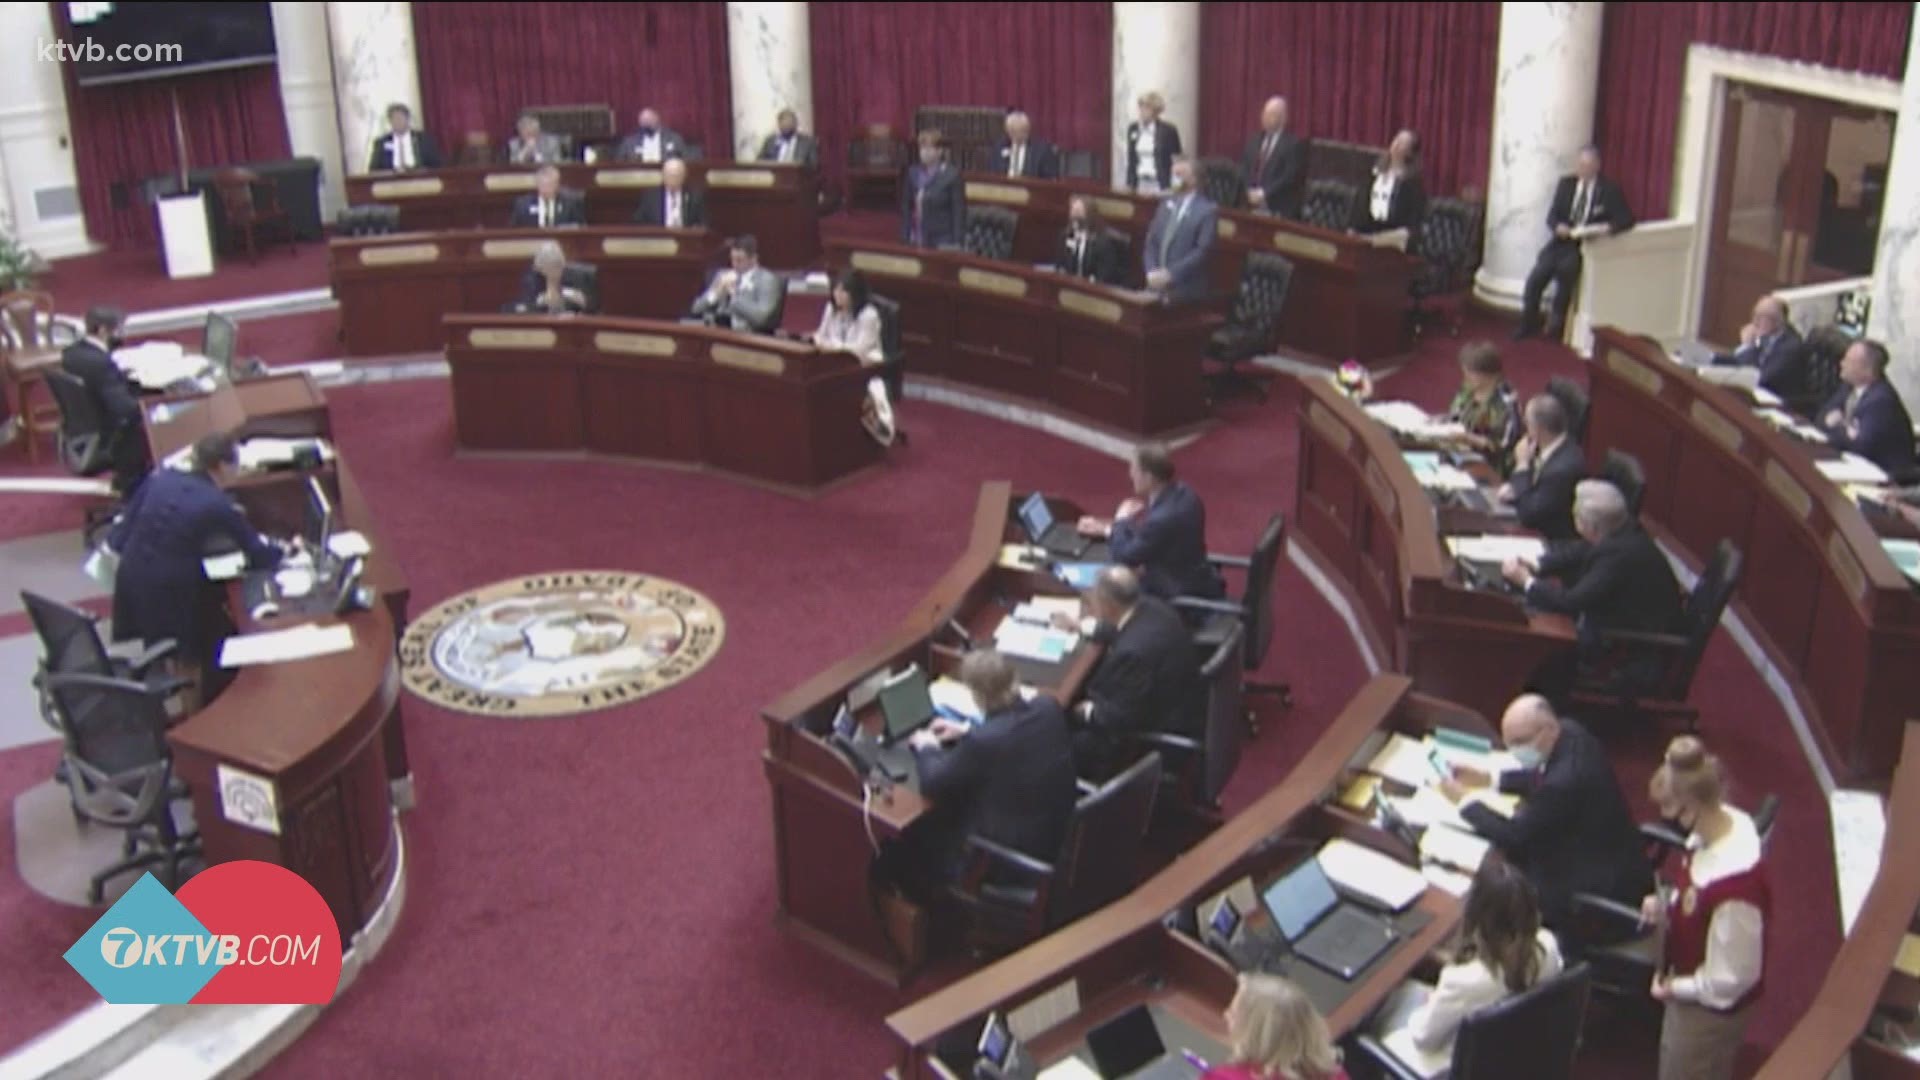 The Idaho legislature is working to pass final legislation as they close in on a near-record session.